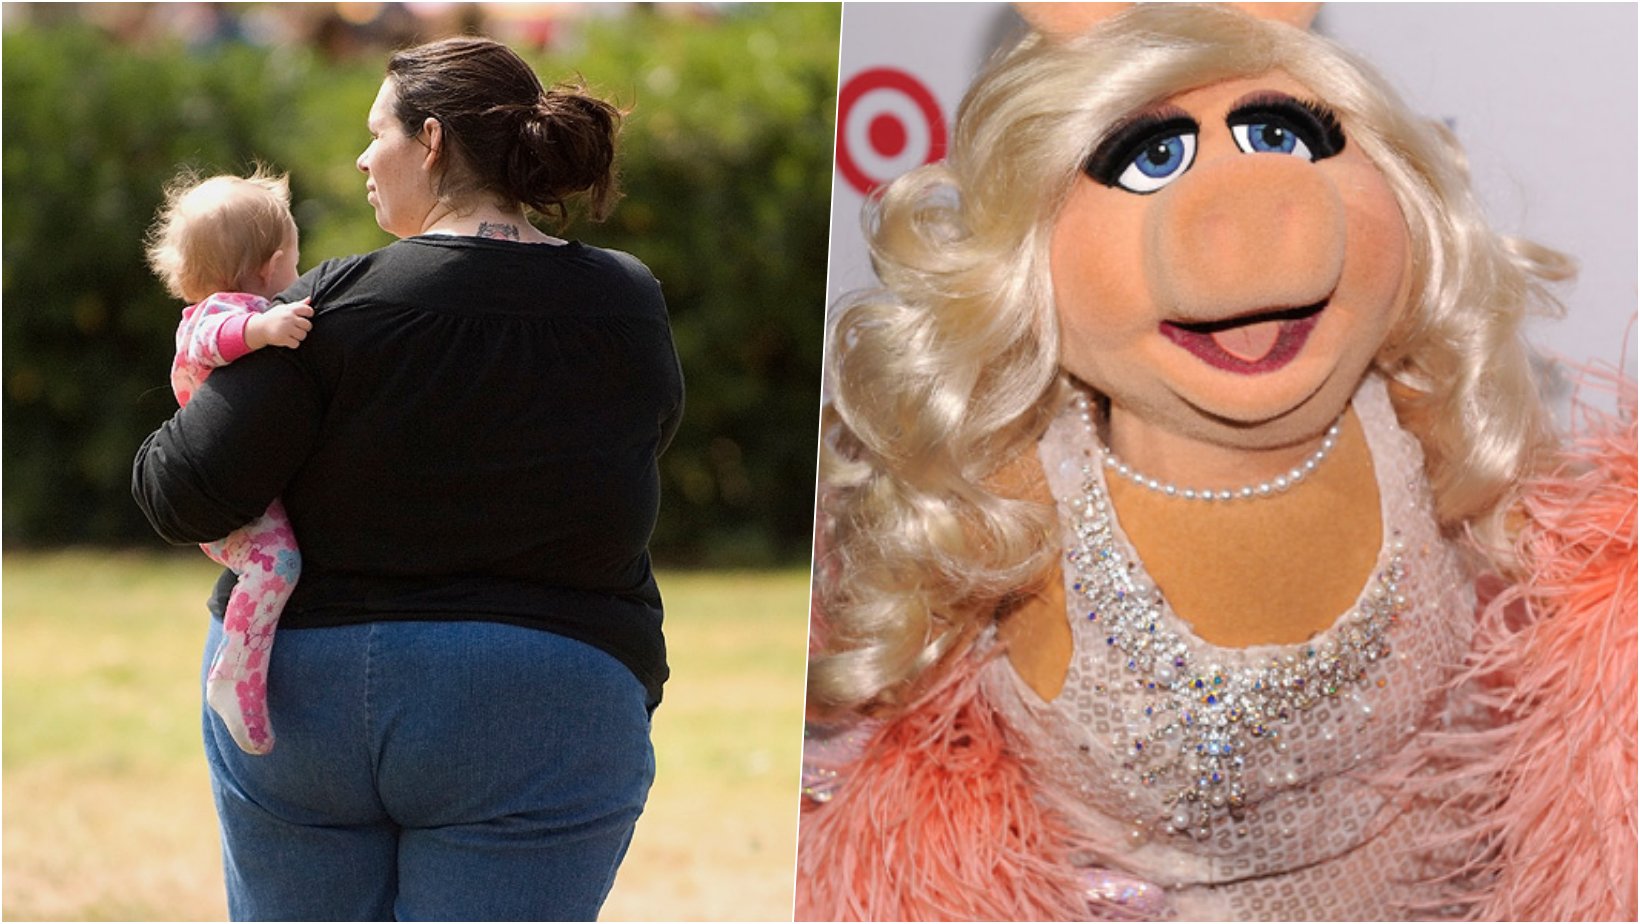 6 facebook cover.png?resize=1200,630 - Wife Feels Bullied By Her Husband After Calling Her “Miss Piggy” To Motivate Her To Lose Weight